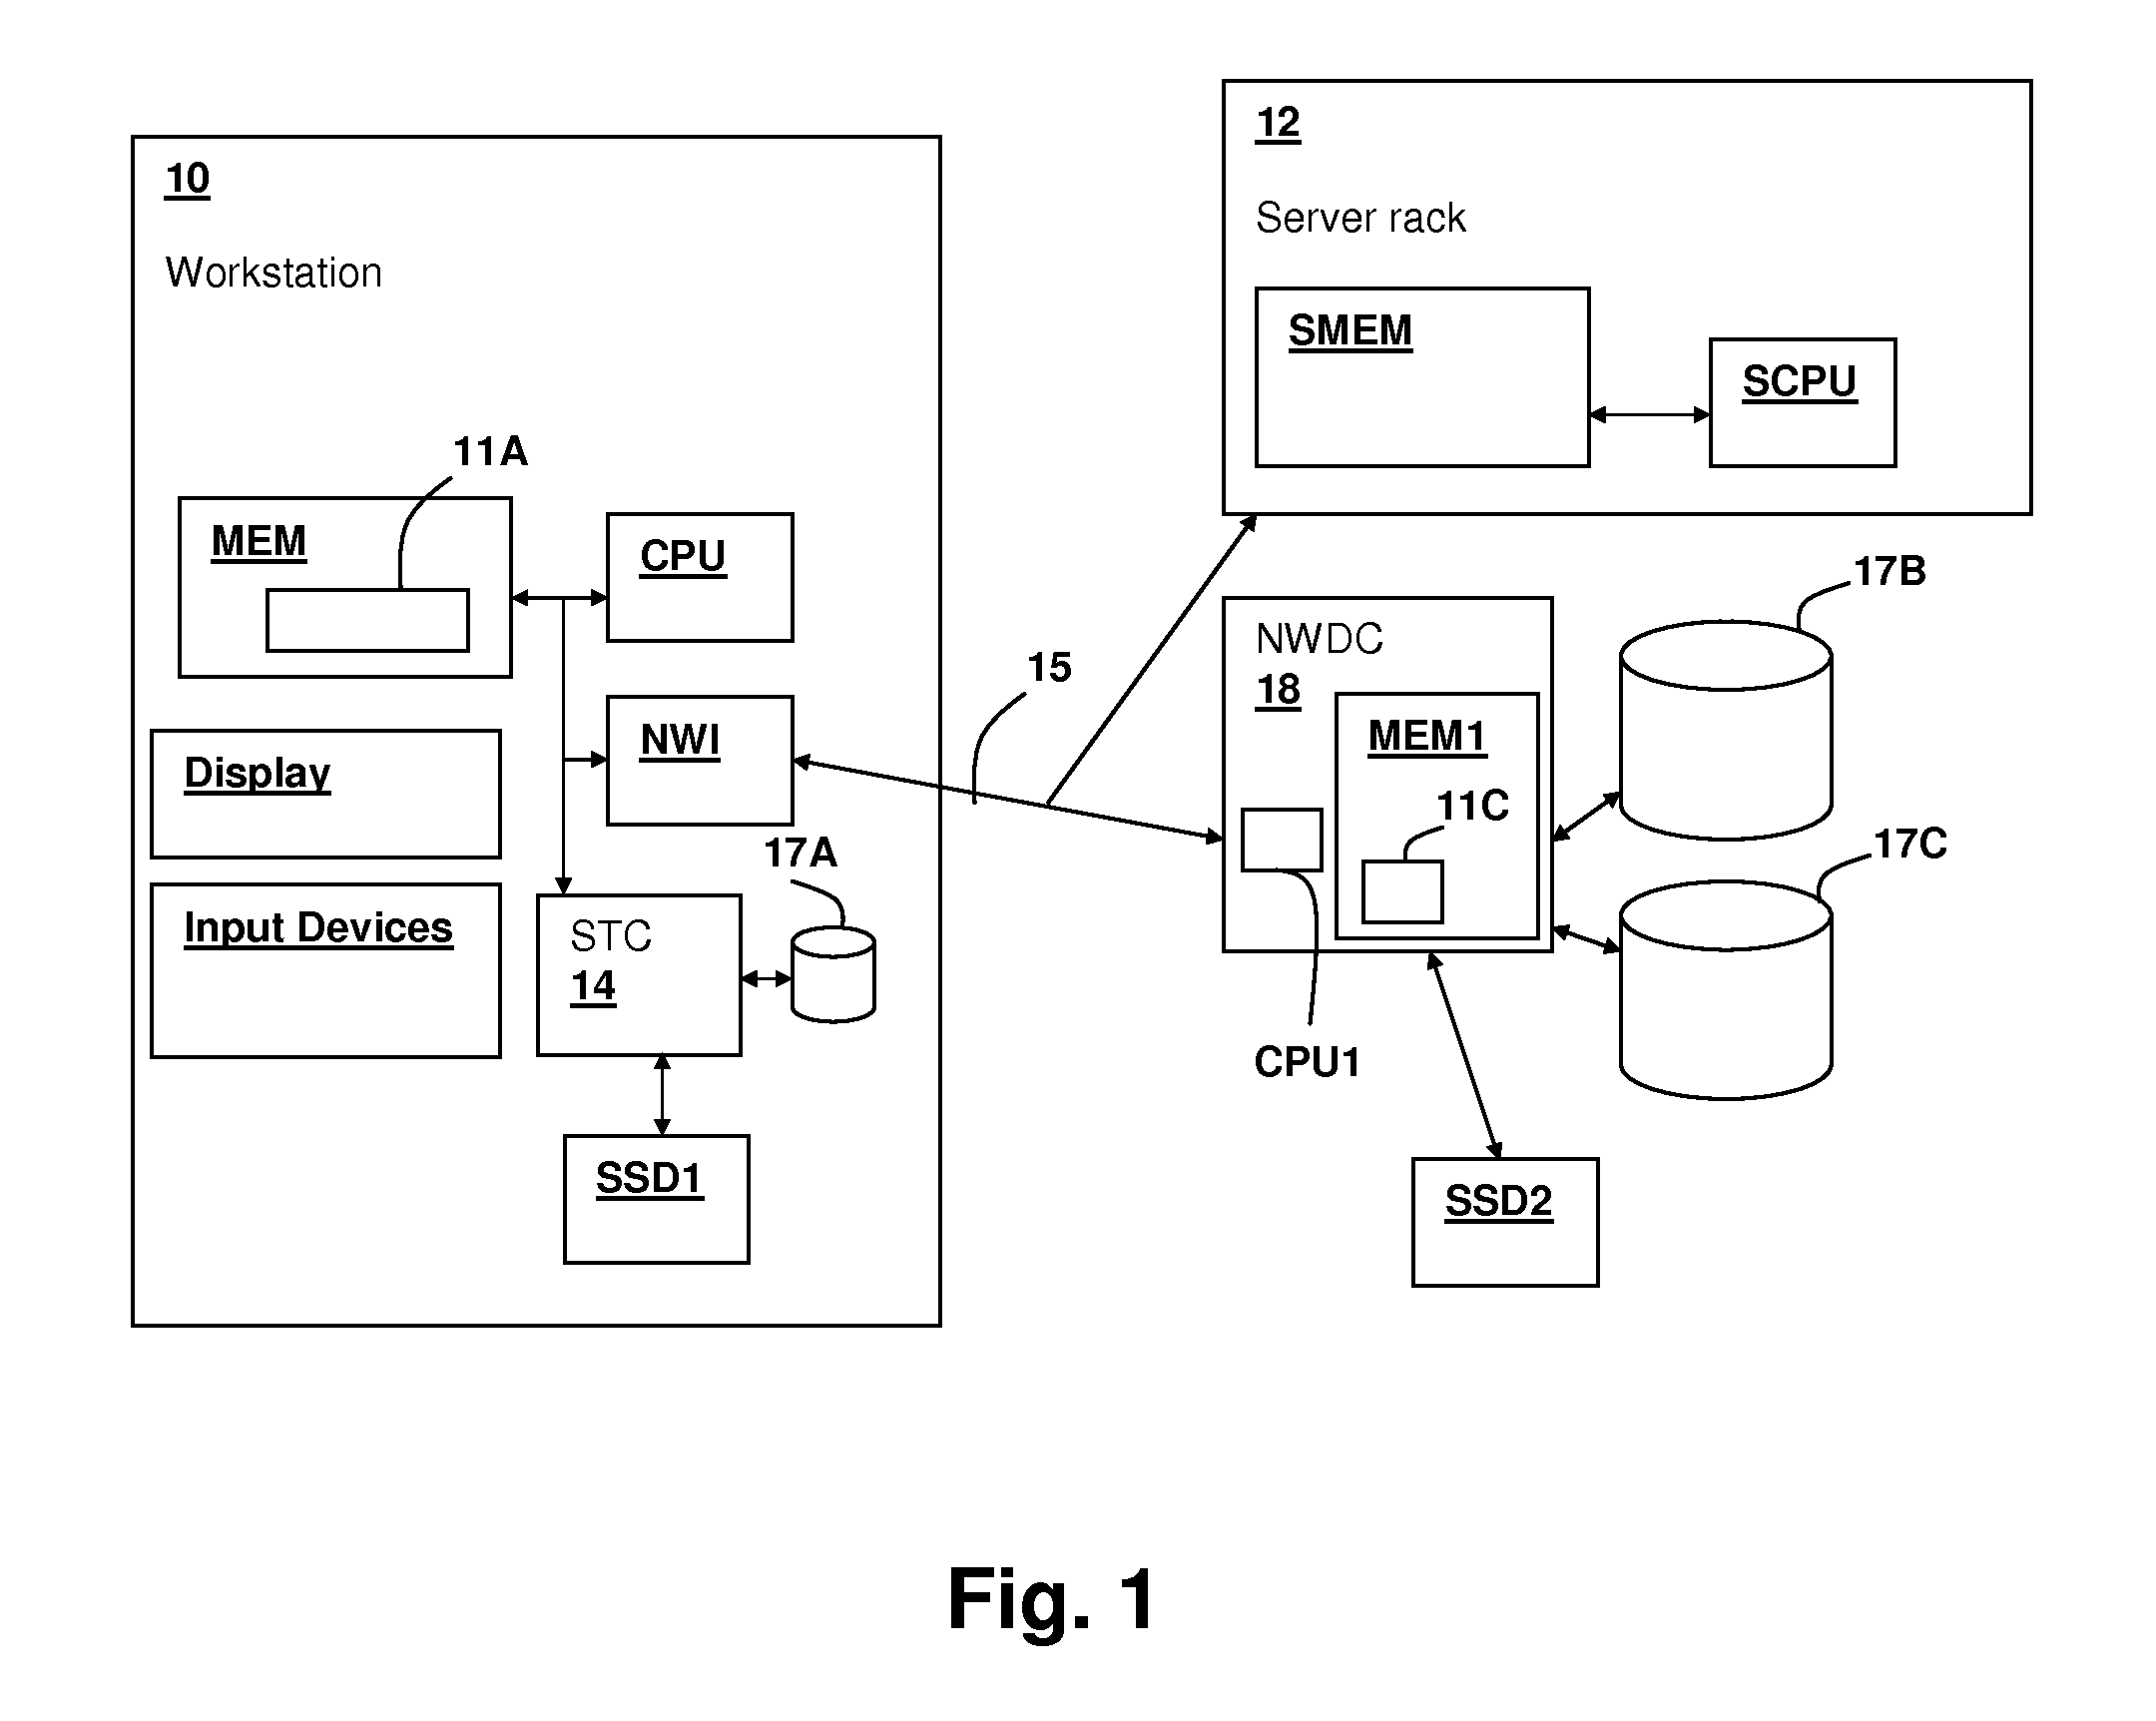 Hybrid storage subsystem with mixed placement of file contents